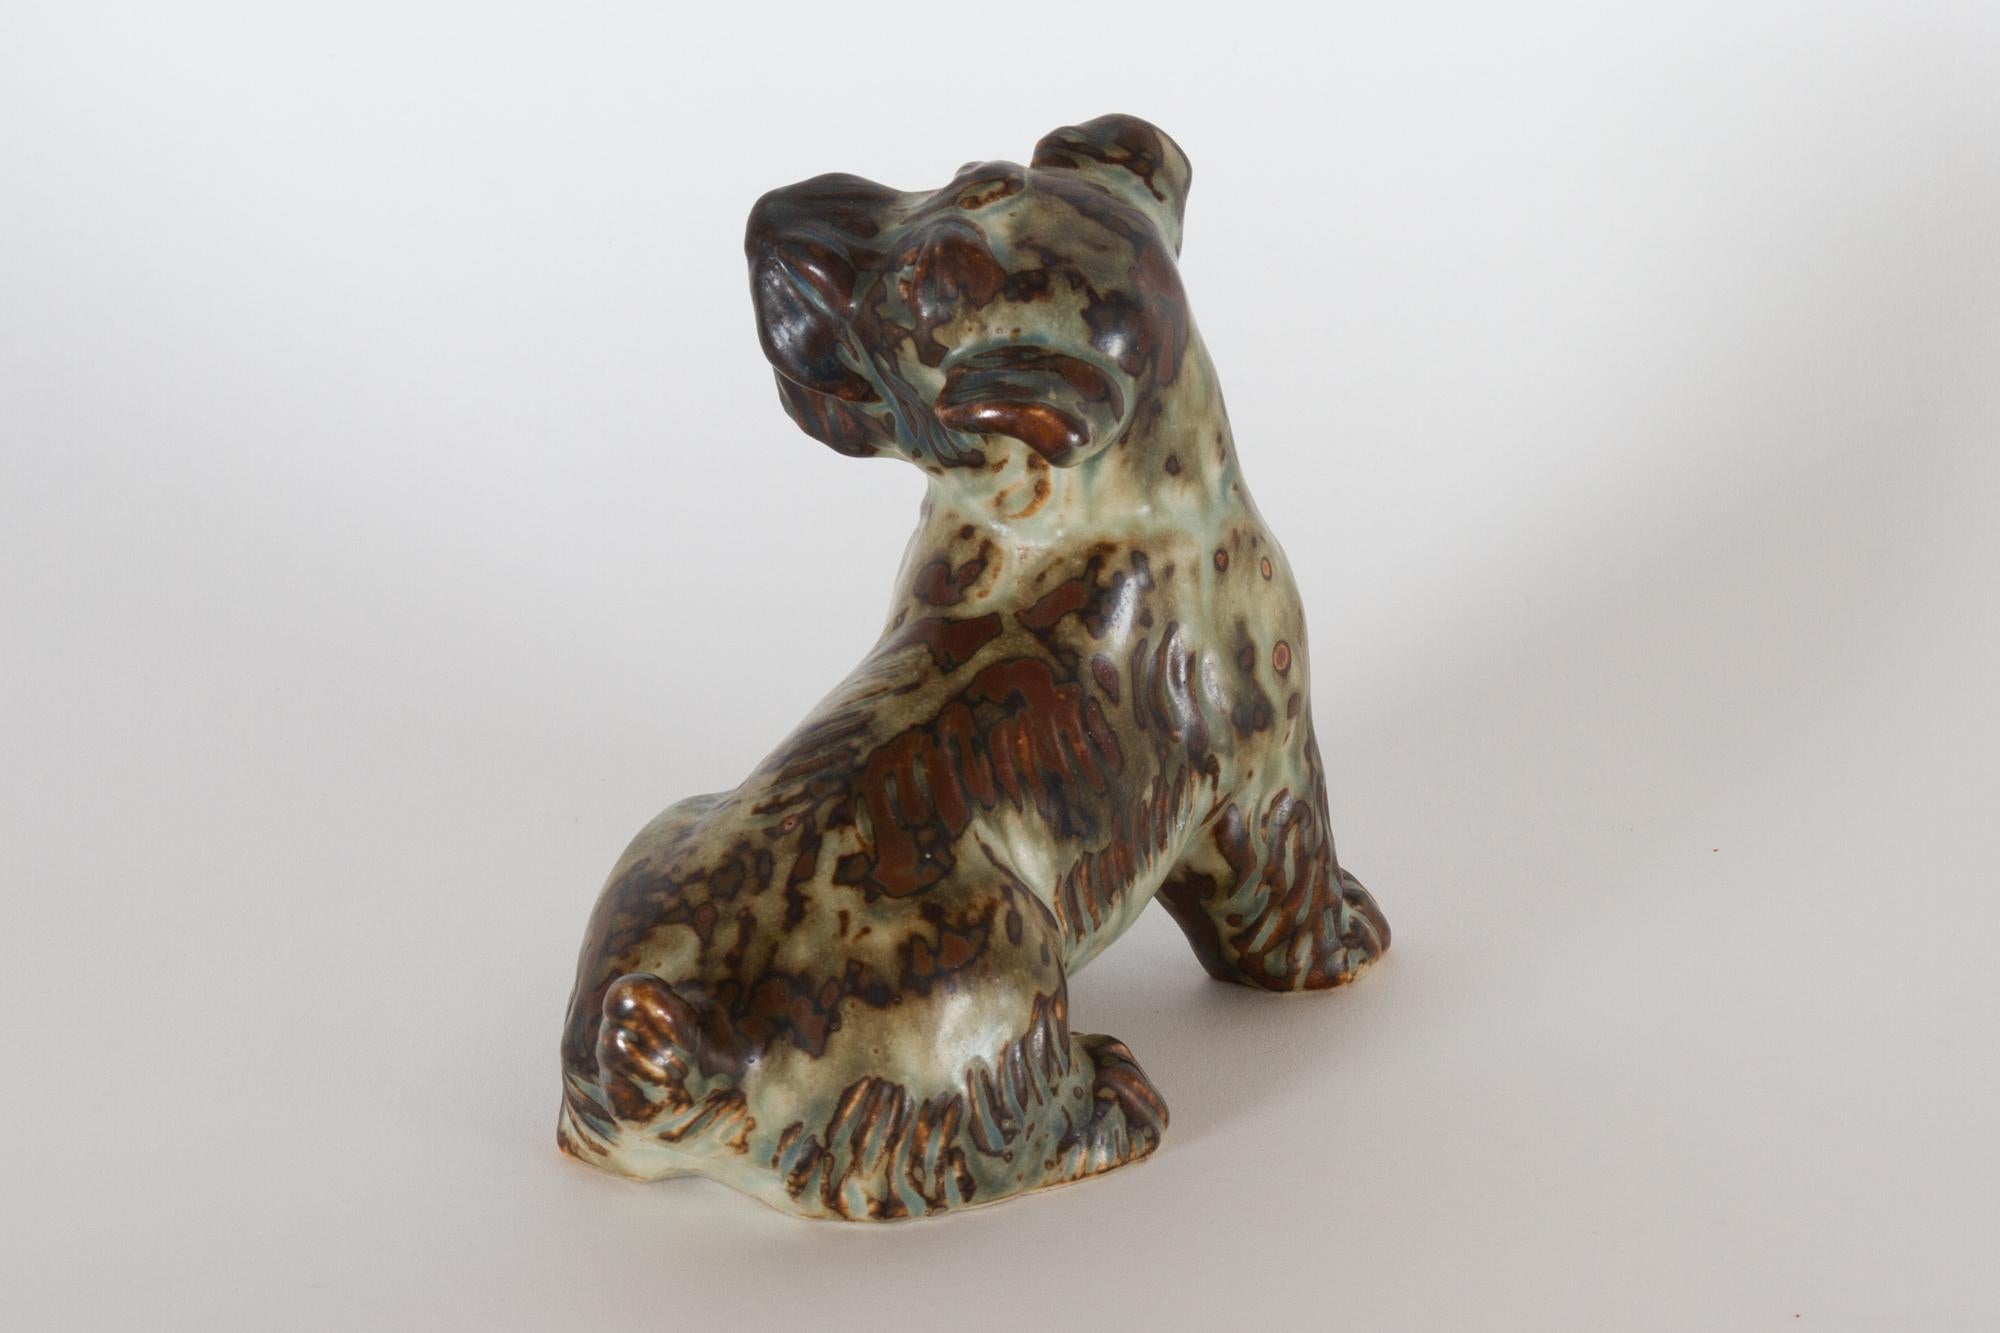 Vintage Danish Terrier Figurine by Knud Kyhn for Royal Copenhagen, 1955 In Good Condition For Sale In Asaa, DK